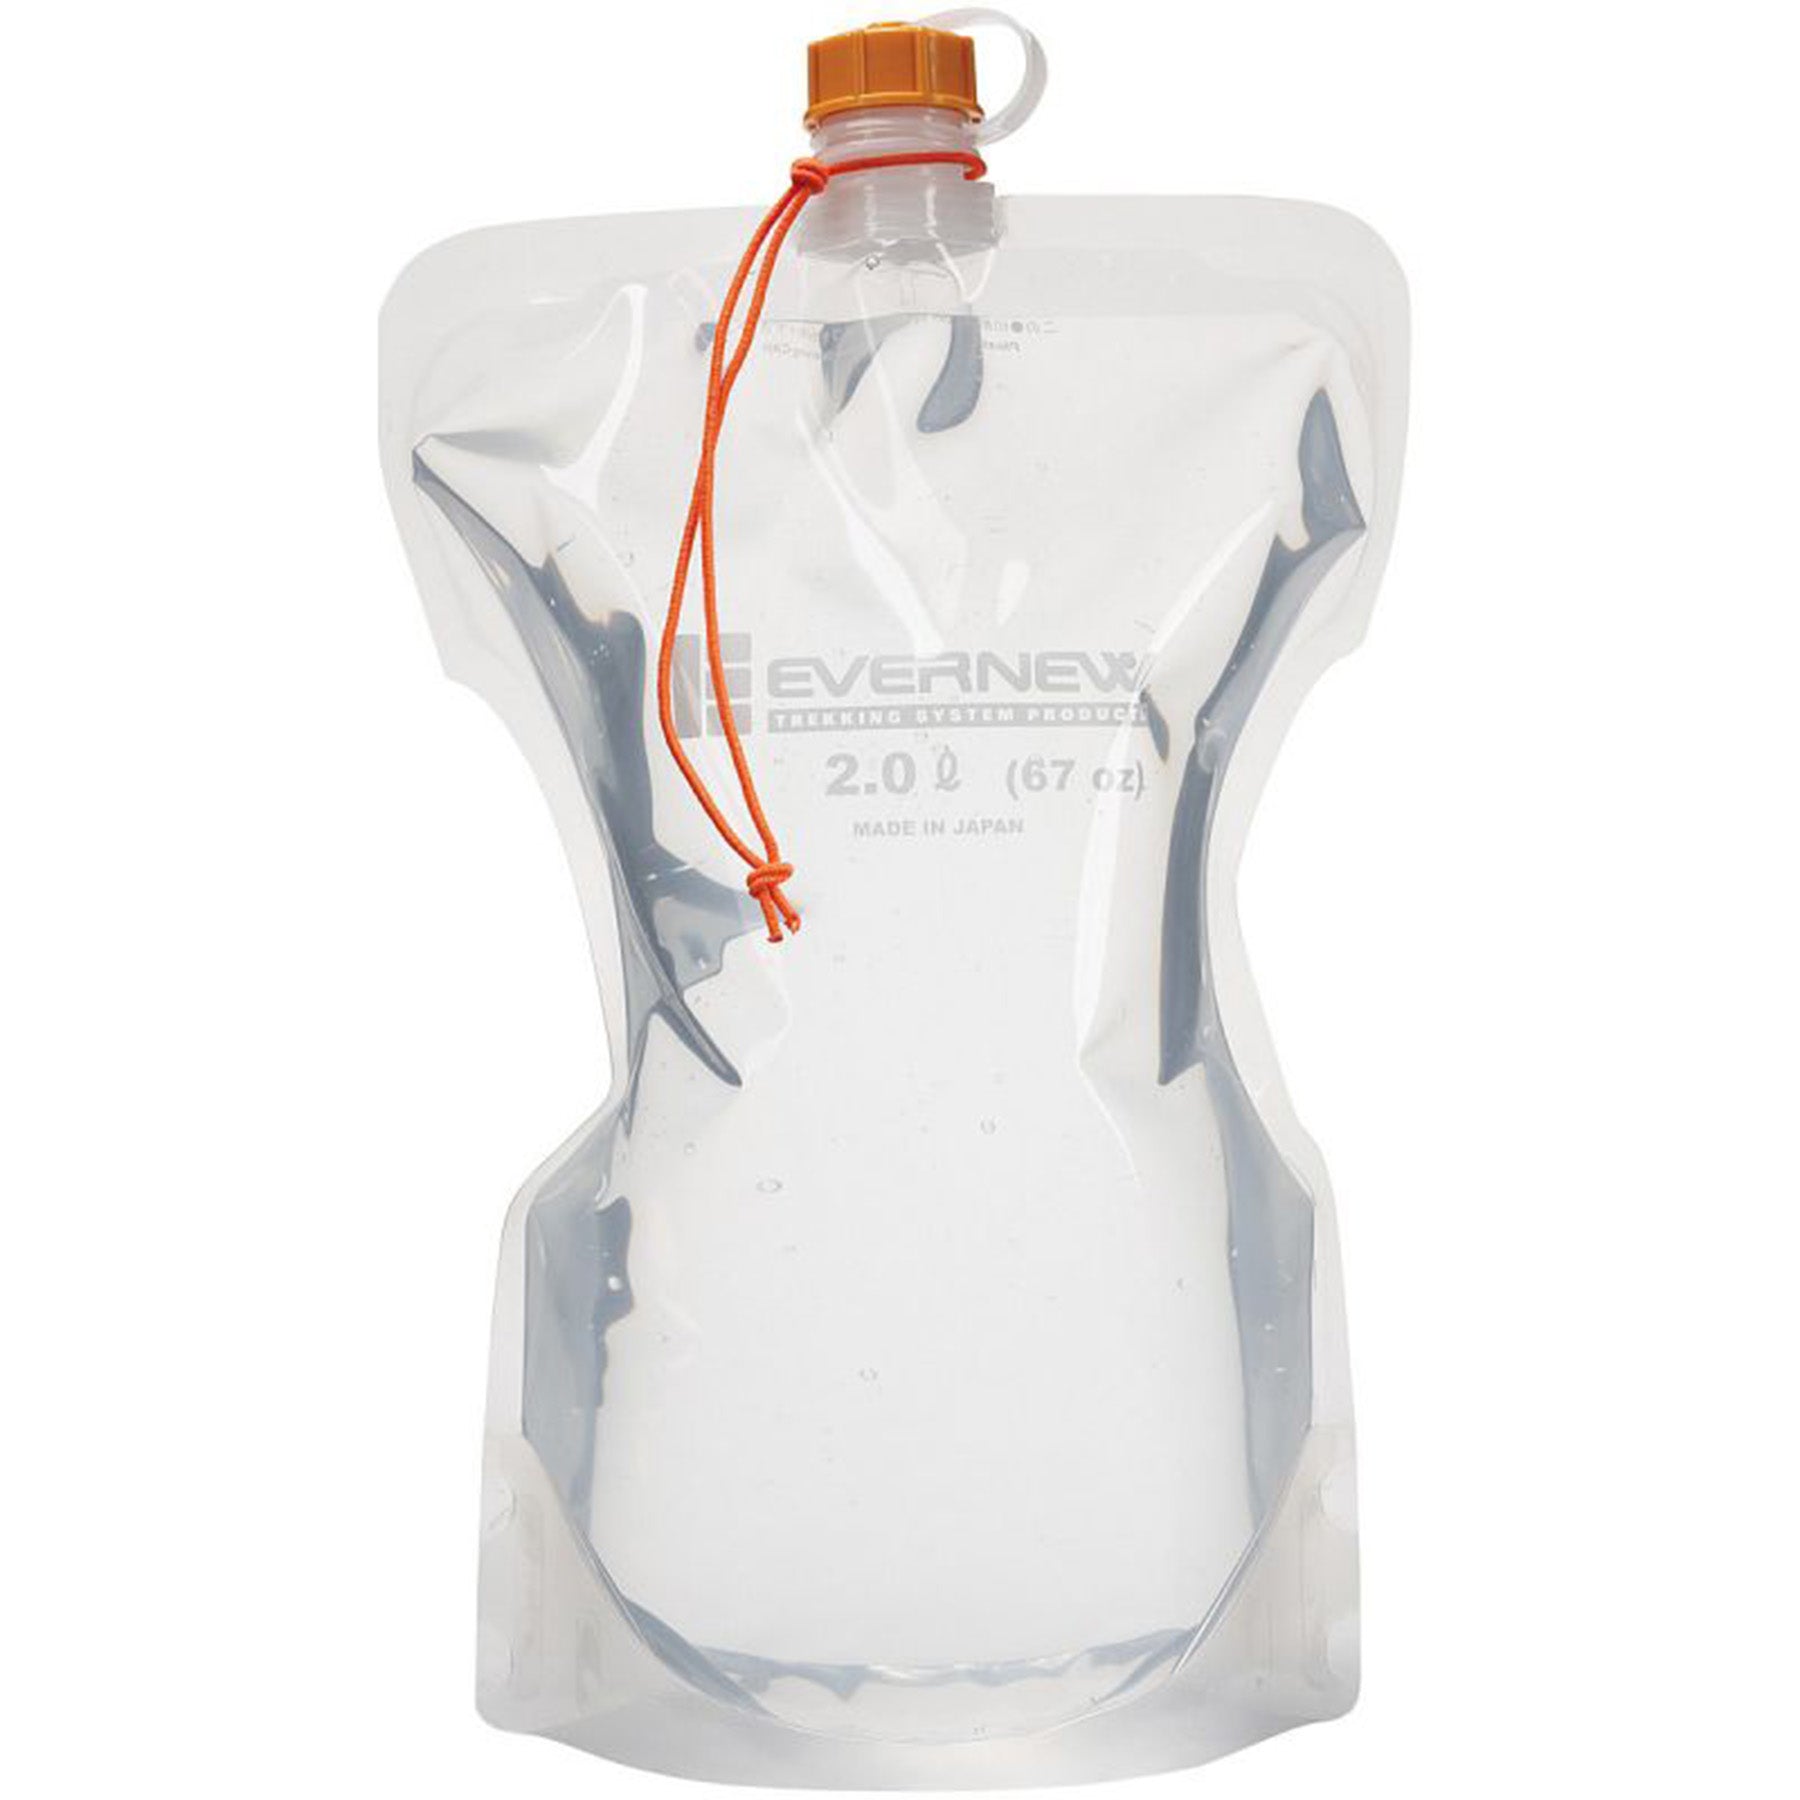 the two liter evernew water bag